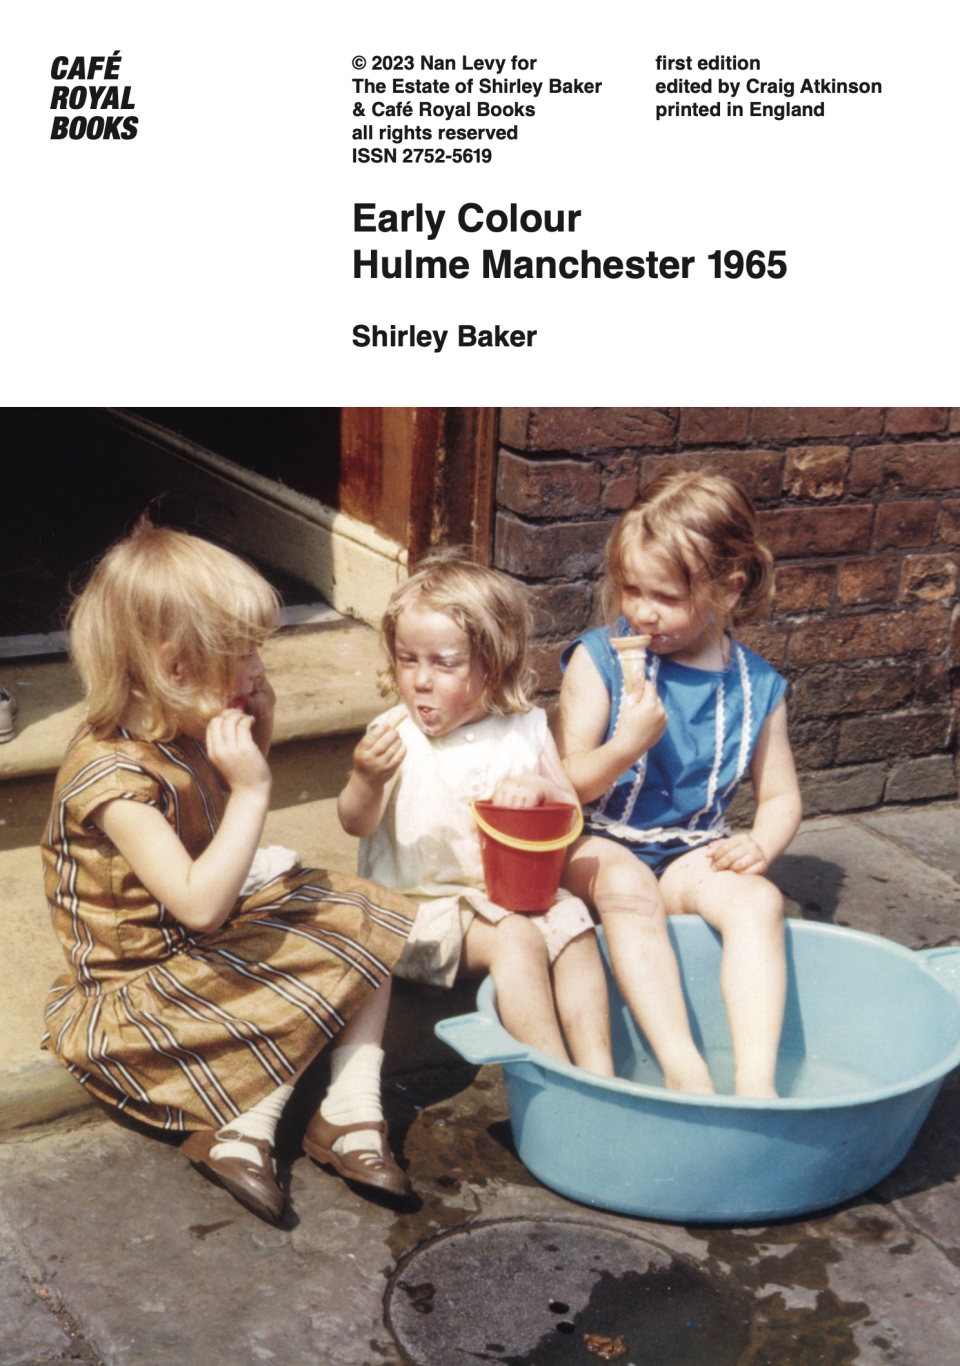 Publication cover with a colour photograph of three small girls sitting outside on a doorstep eating ice cream and ice lollies. Two of them have their feet in a blue bucket.